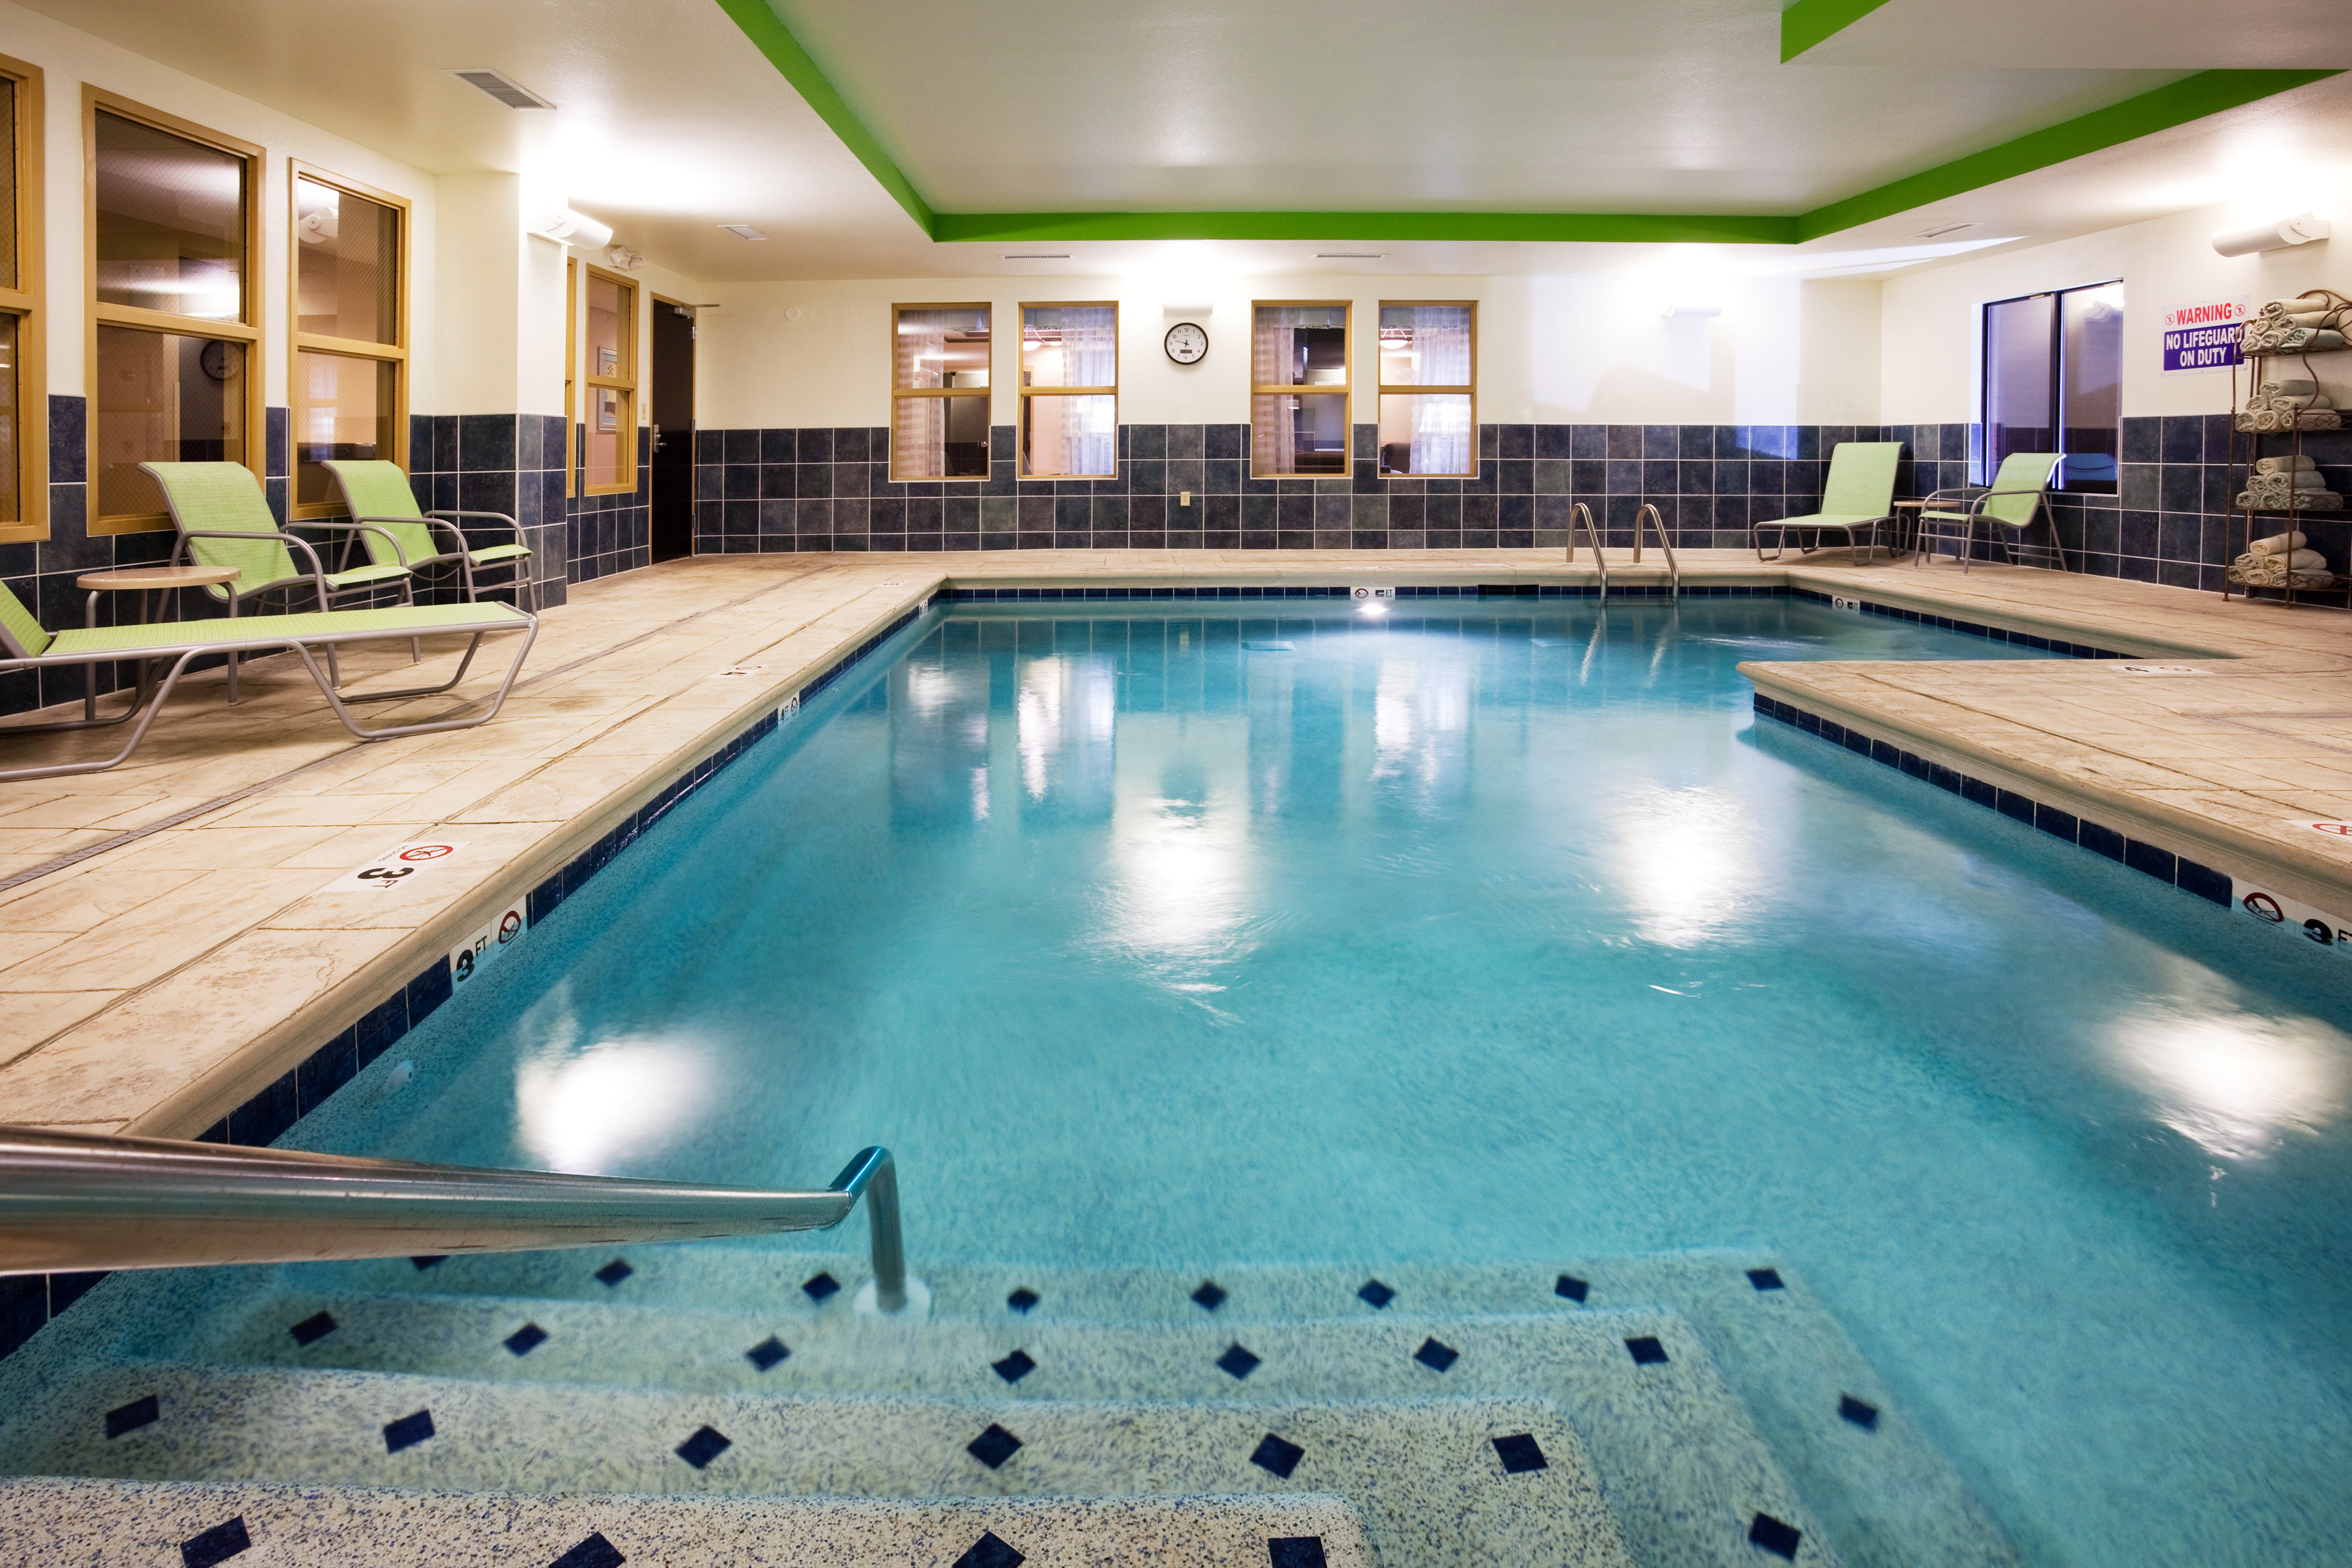 Have fun in our heated salt water pool!